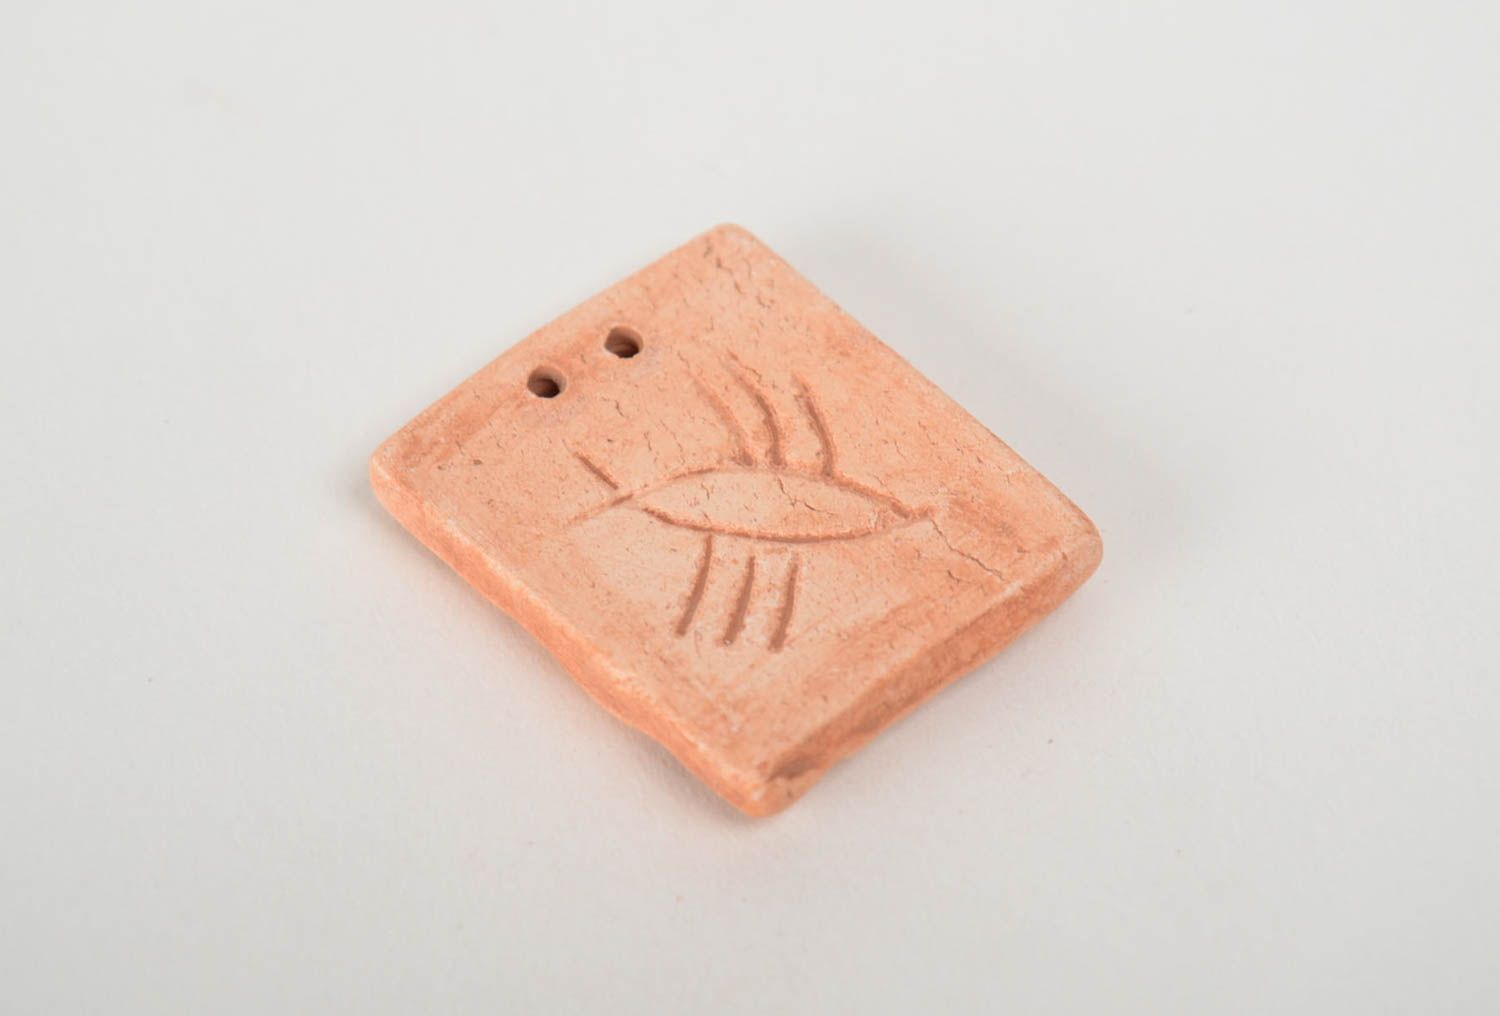 Homemade relief flat ceramic decoration for jewelry making pendant without cord photo 3